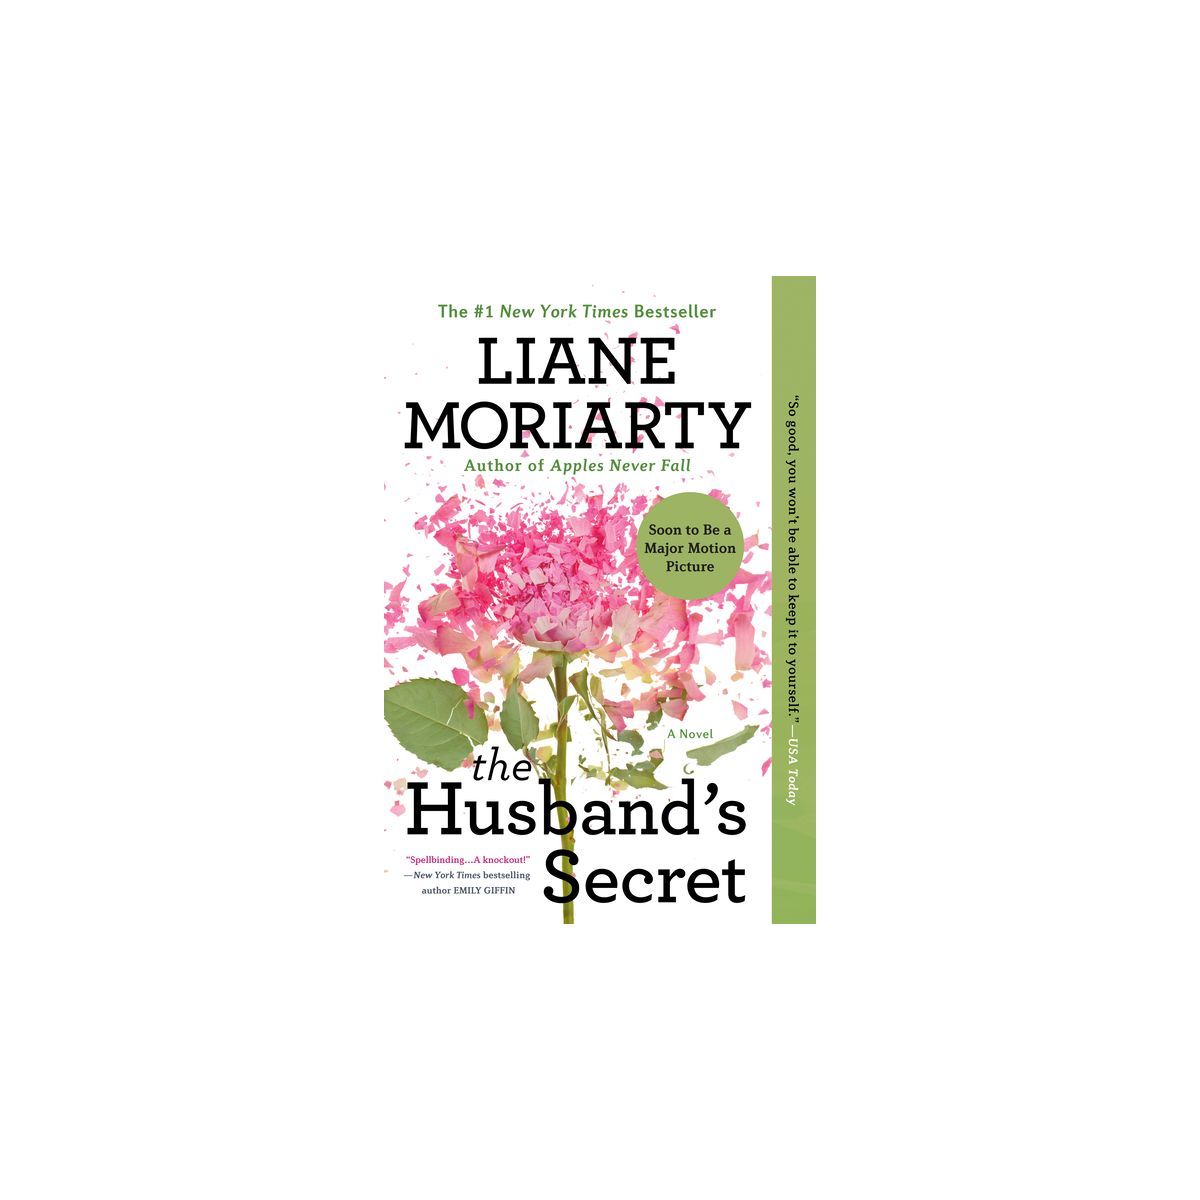 The Husband's Secret (Reissue) (Paperback) by Liane Moriarty | Target